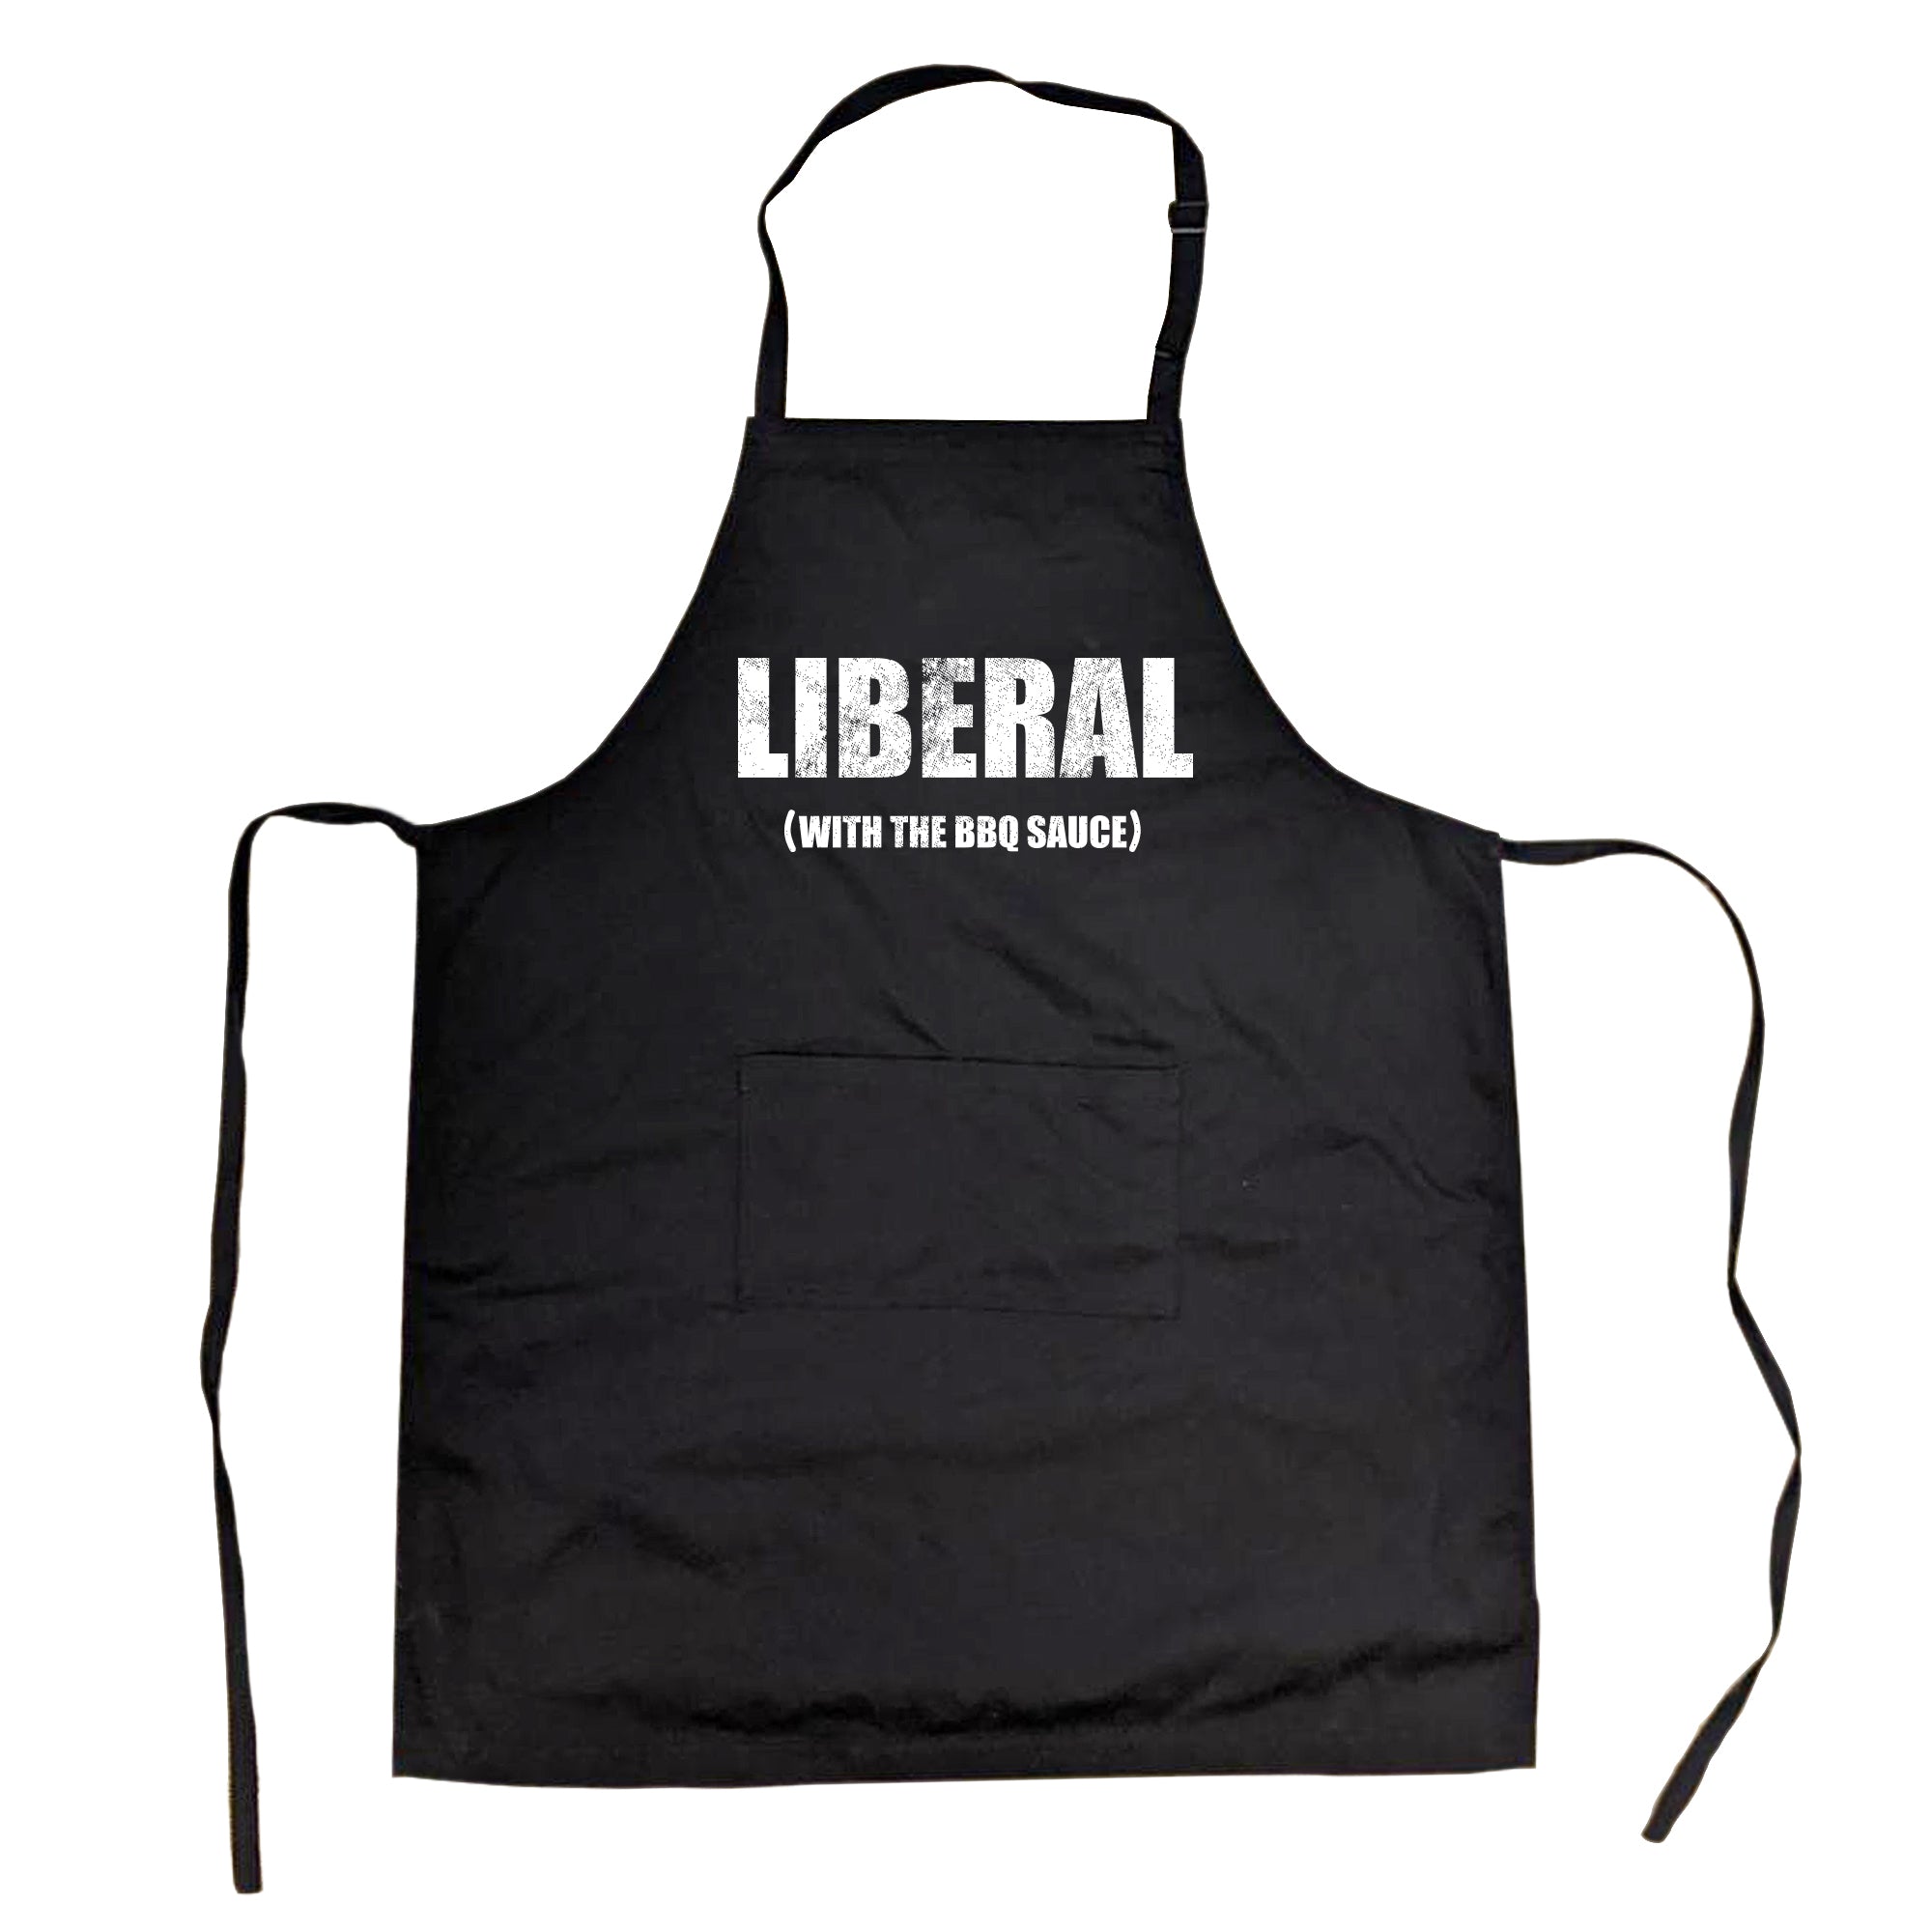 Funny Black - LIBERAL Liberal With The BBQ Sauce Apron Nerdy Food sarcastic Tee